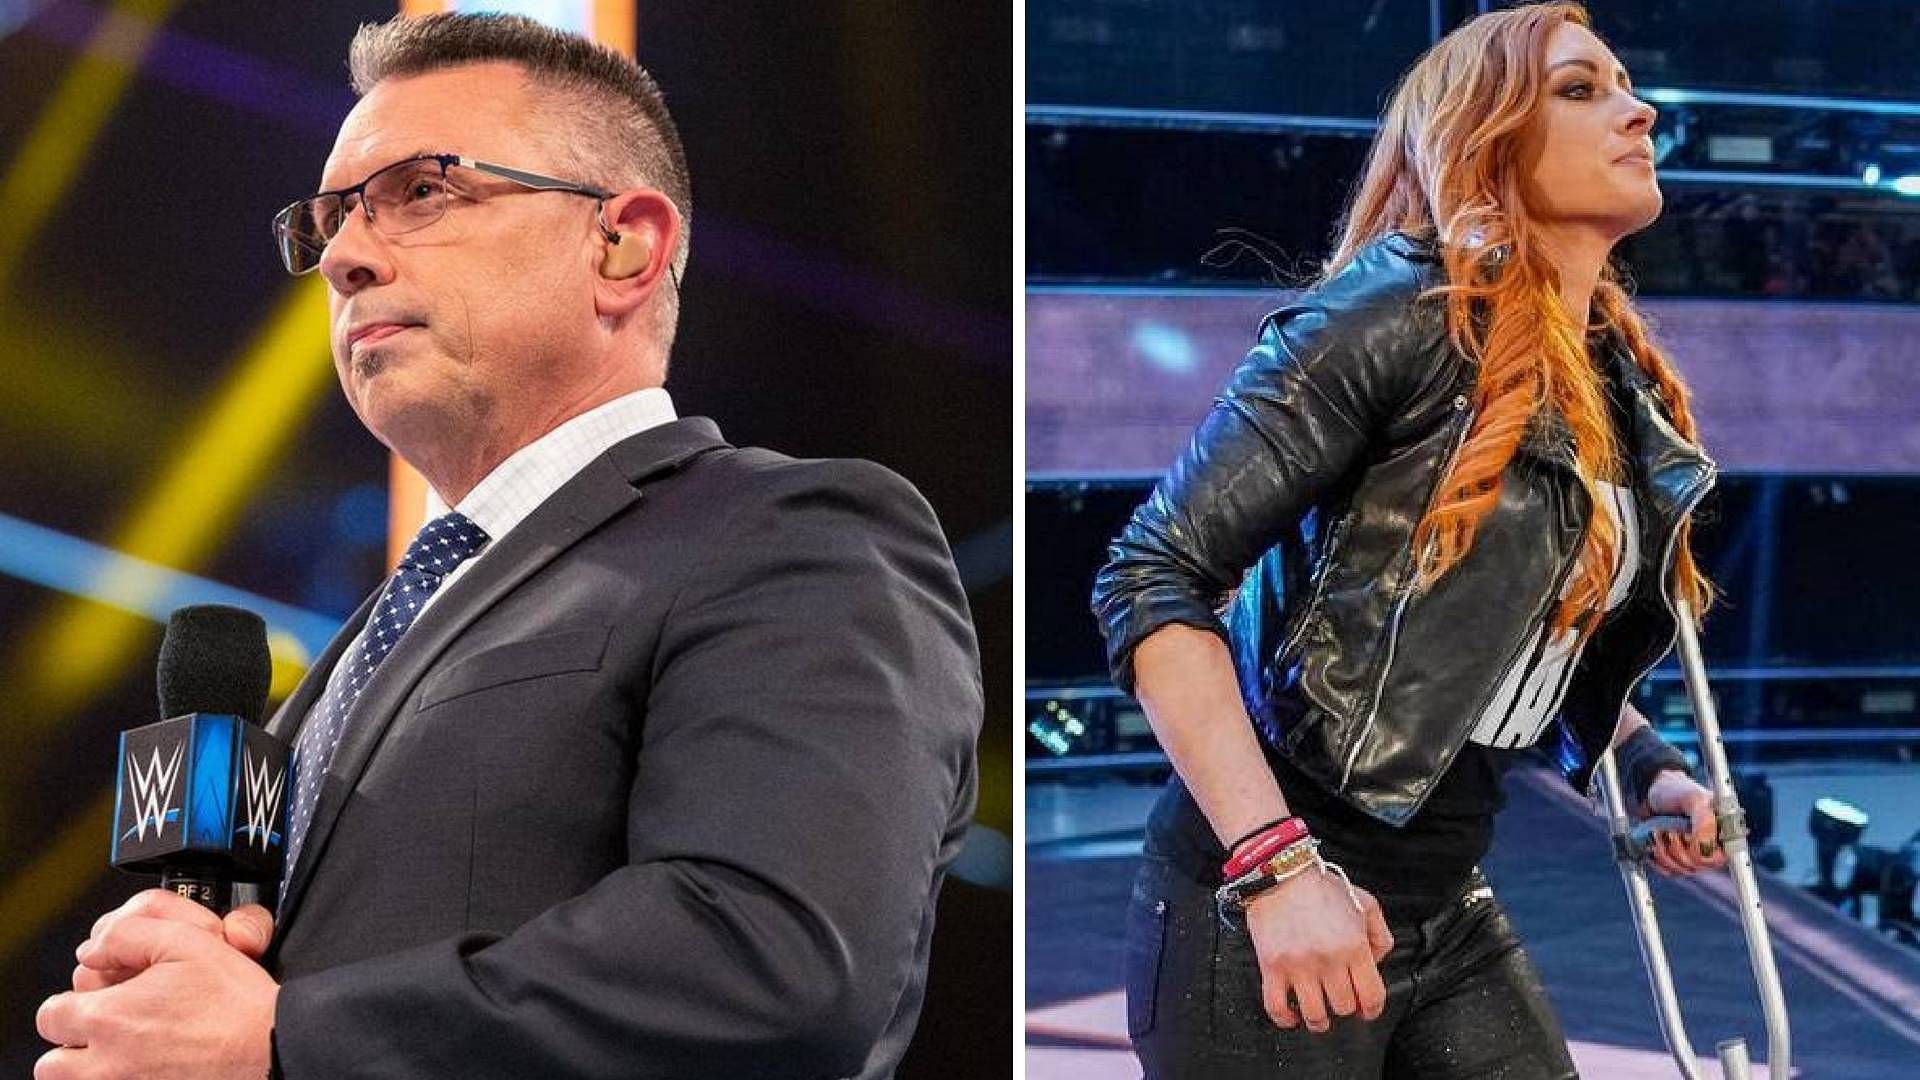 Michael Cole and Becky Lynch